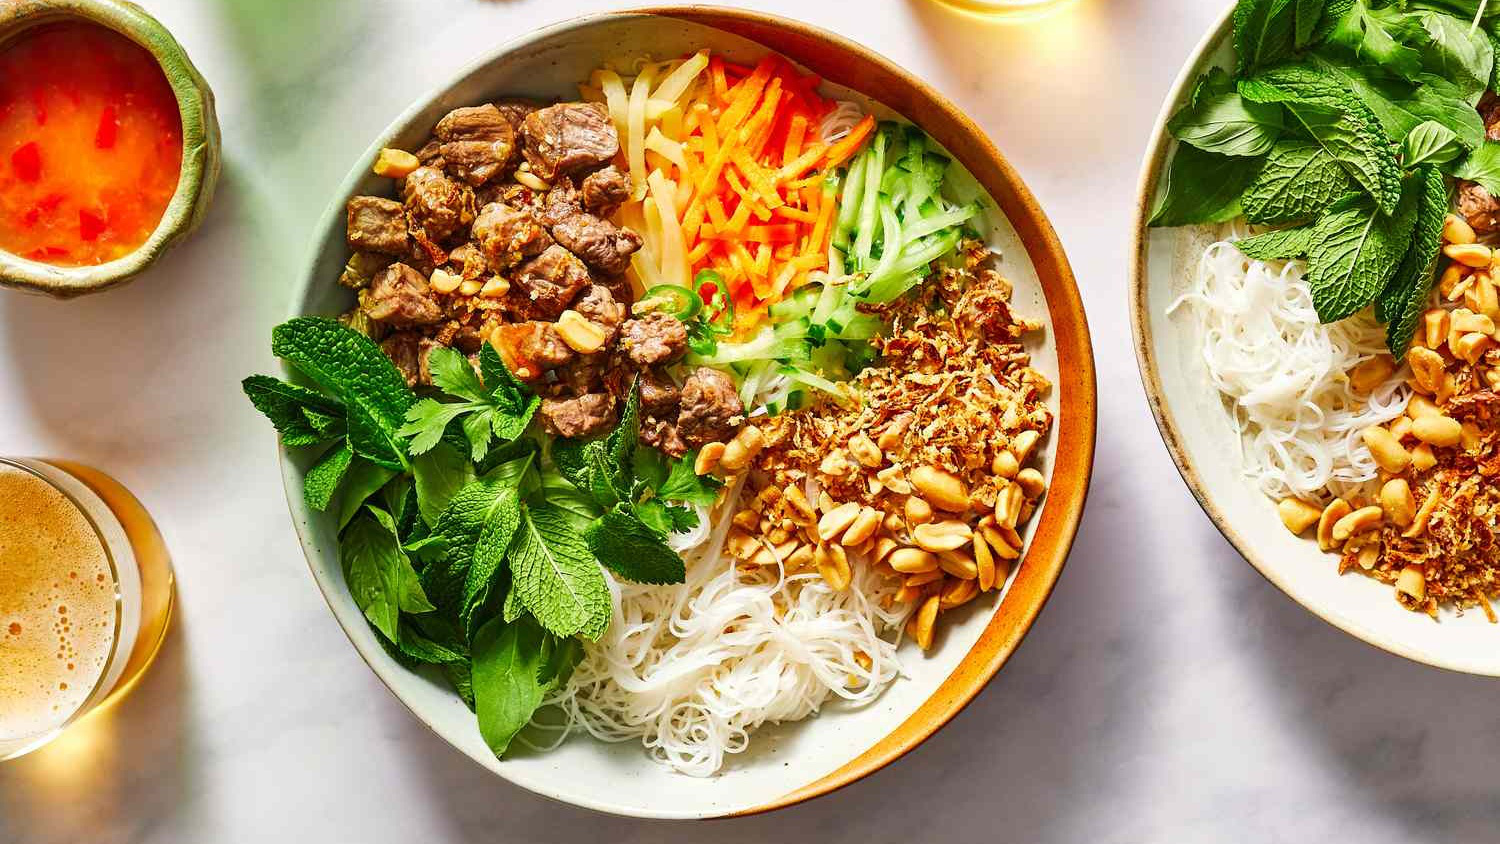 Top 20 must-try dishes in Ho Chi Minh City: Bun thit nuong - Vietnamese rice vermicelli with grilled pork